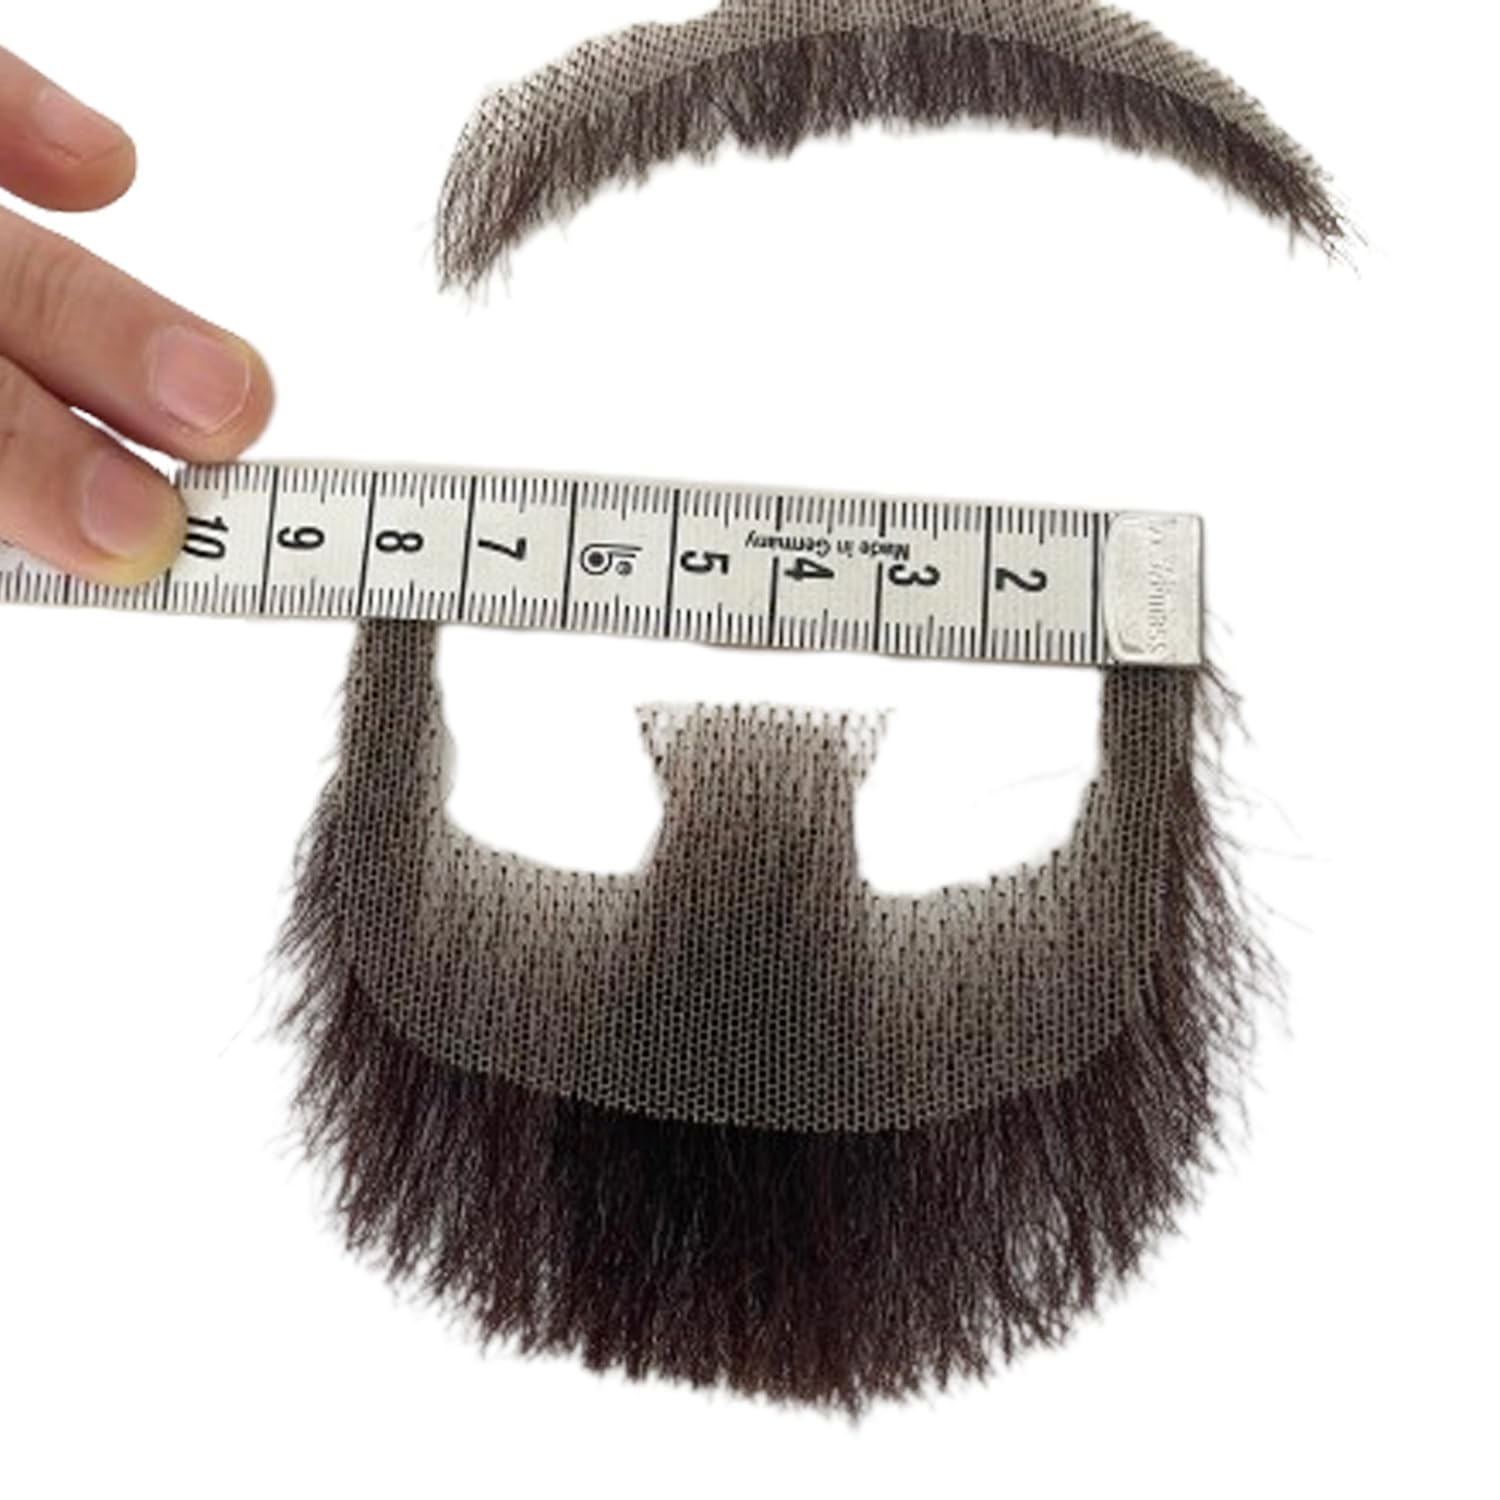 Volora Fake Beard Realistic Human Hair Full Hand Tied Facial Hair False Beards Lace Invisible Fake Face Mustache for Party Movie Makeup Halloween Cosplay Costume Party (Style-1, Brown)